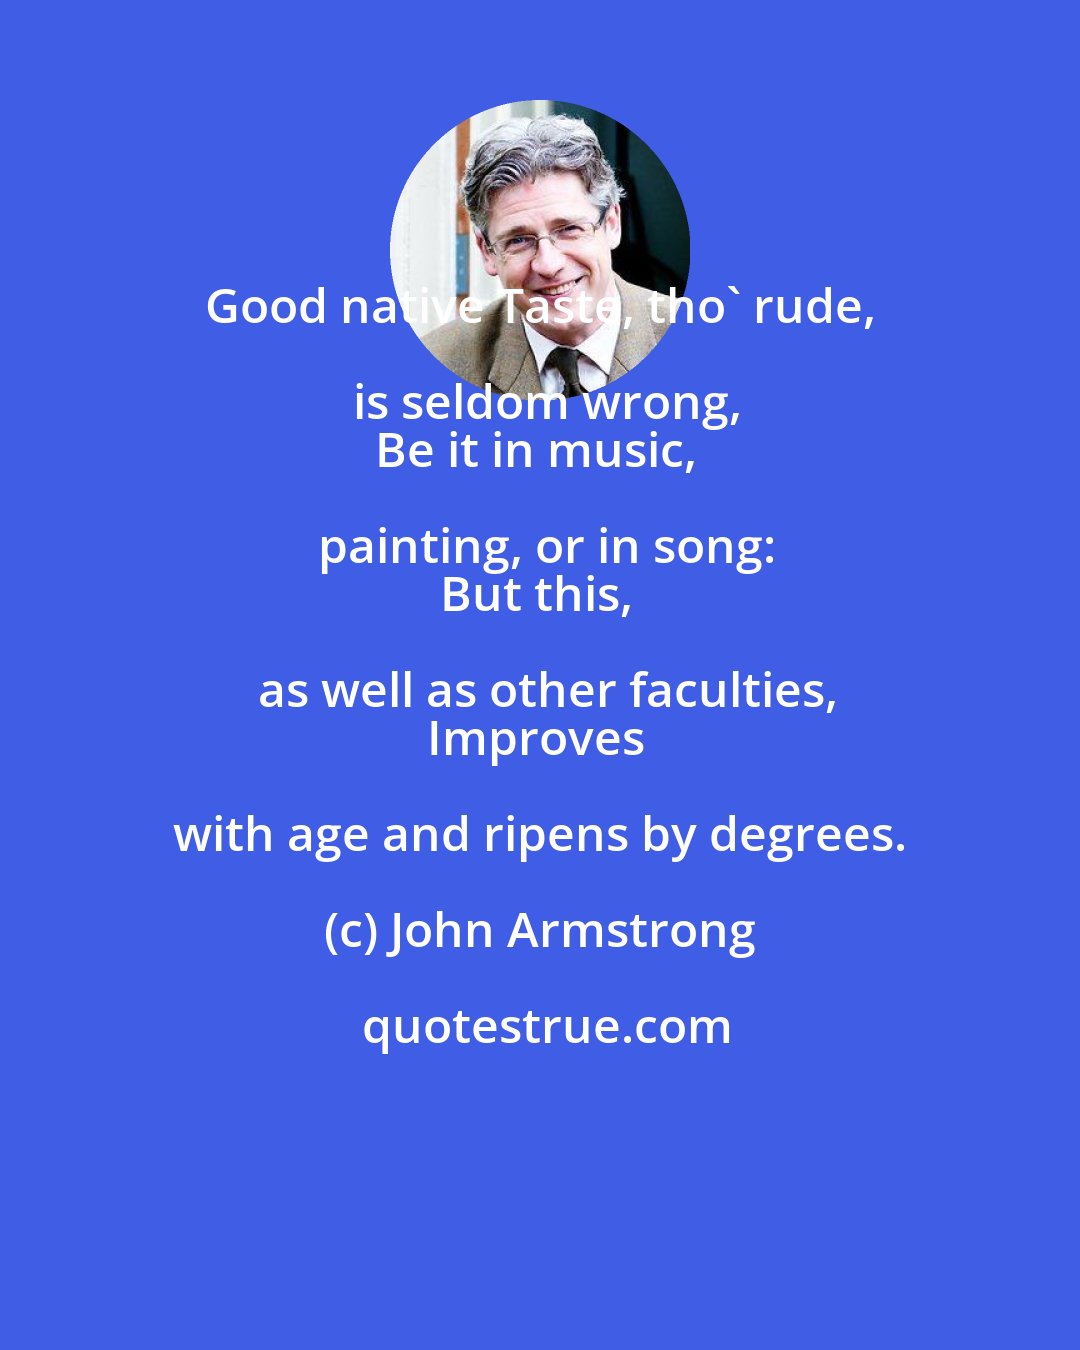 John Armstrong: Good native Taste, tho' rude, is seldom wrong,
Be it in music, painting, or in song:
But this, as well as other faculties,
Improves with age and ripens by degrees.